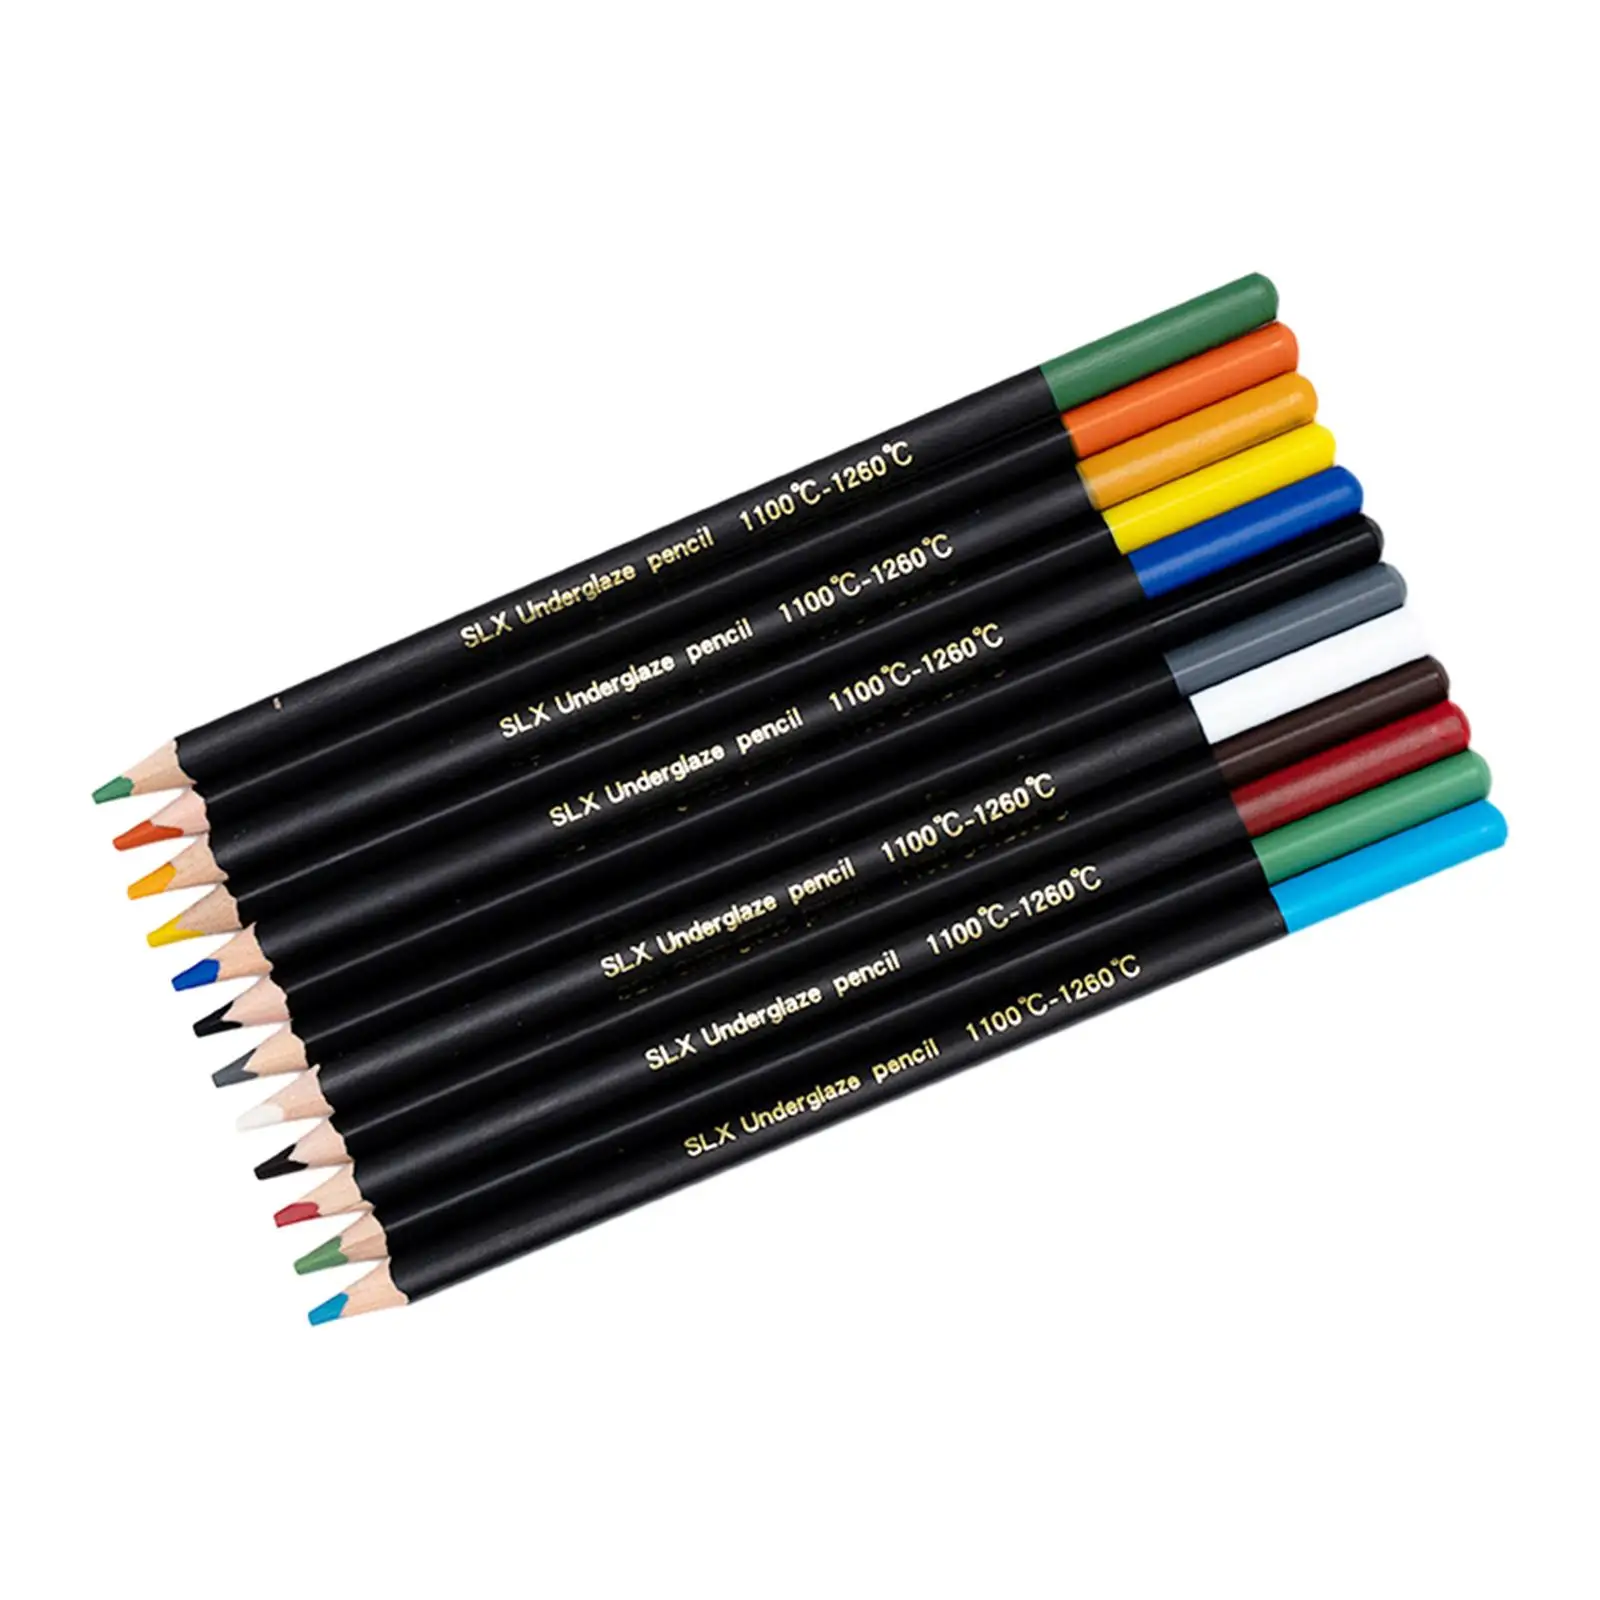 Colored Pencils Oil based Professional 12 Count Coloring Pencils Set for Sketching Art Supplies Shading Artist Coloring Books